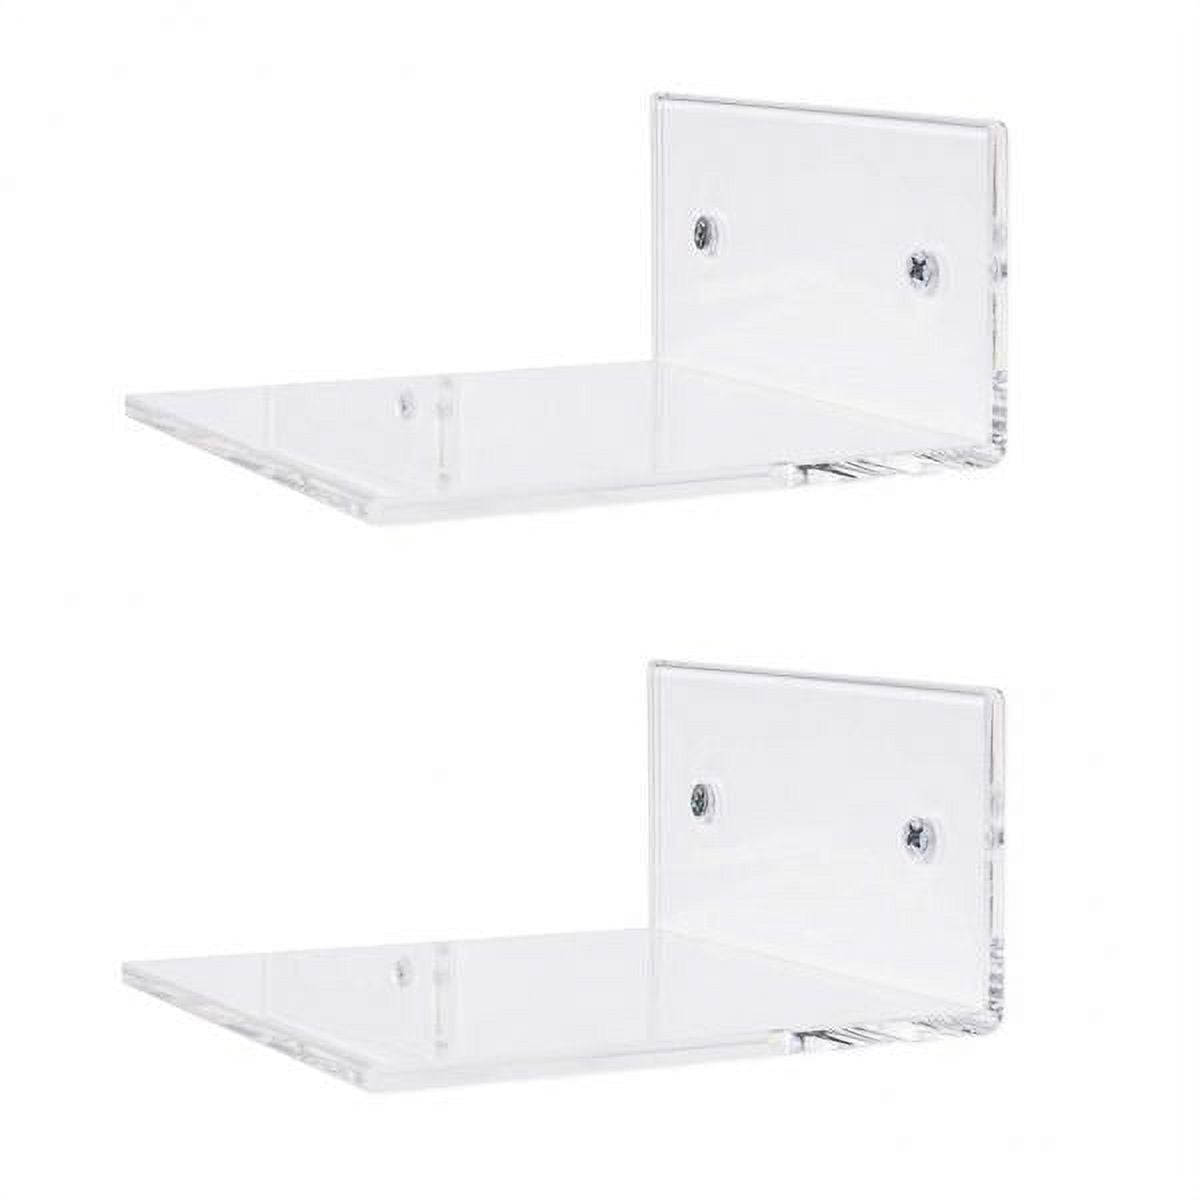 Acrylic Small Shelf for Wall Storage Clear Adhesive Shelf for